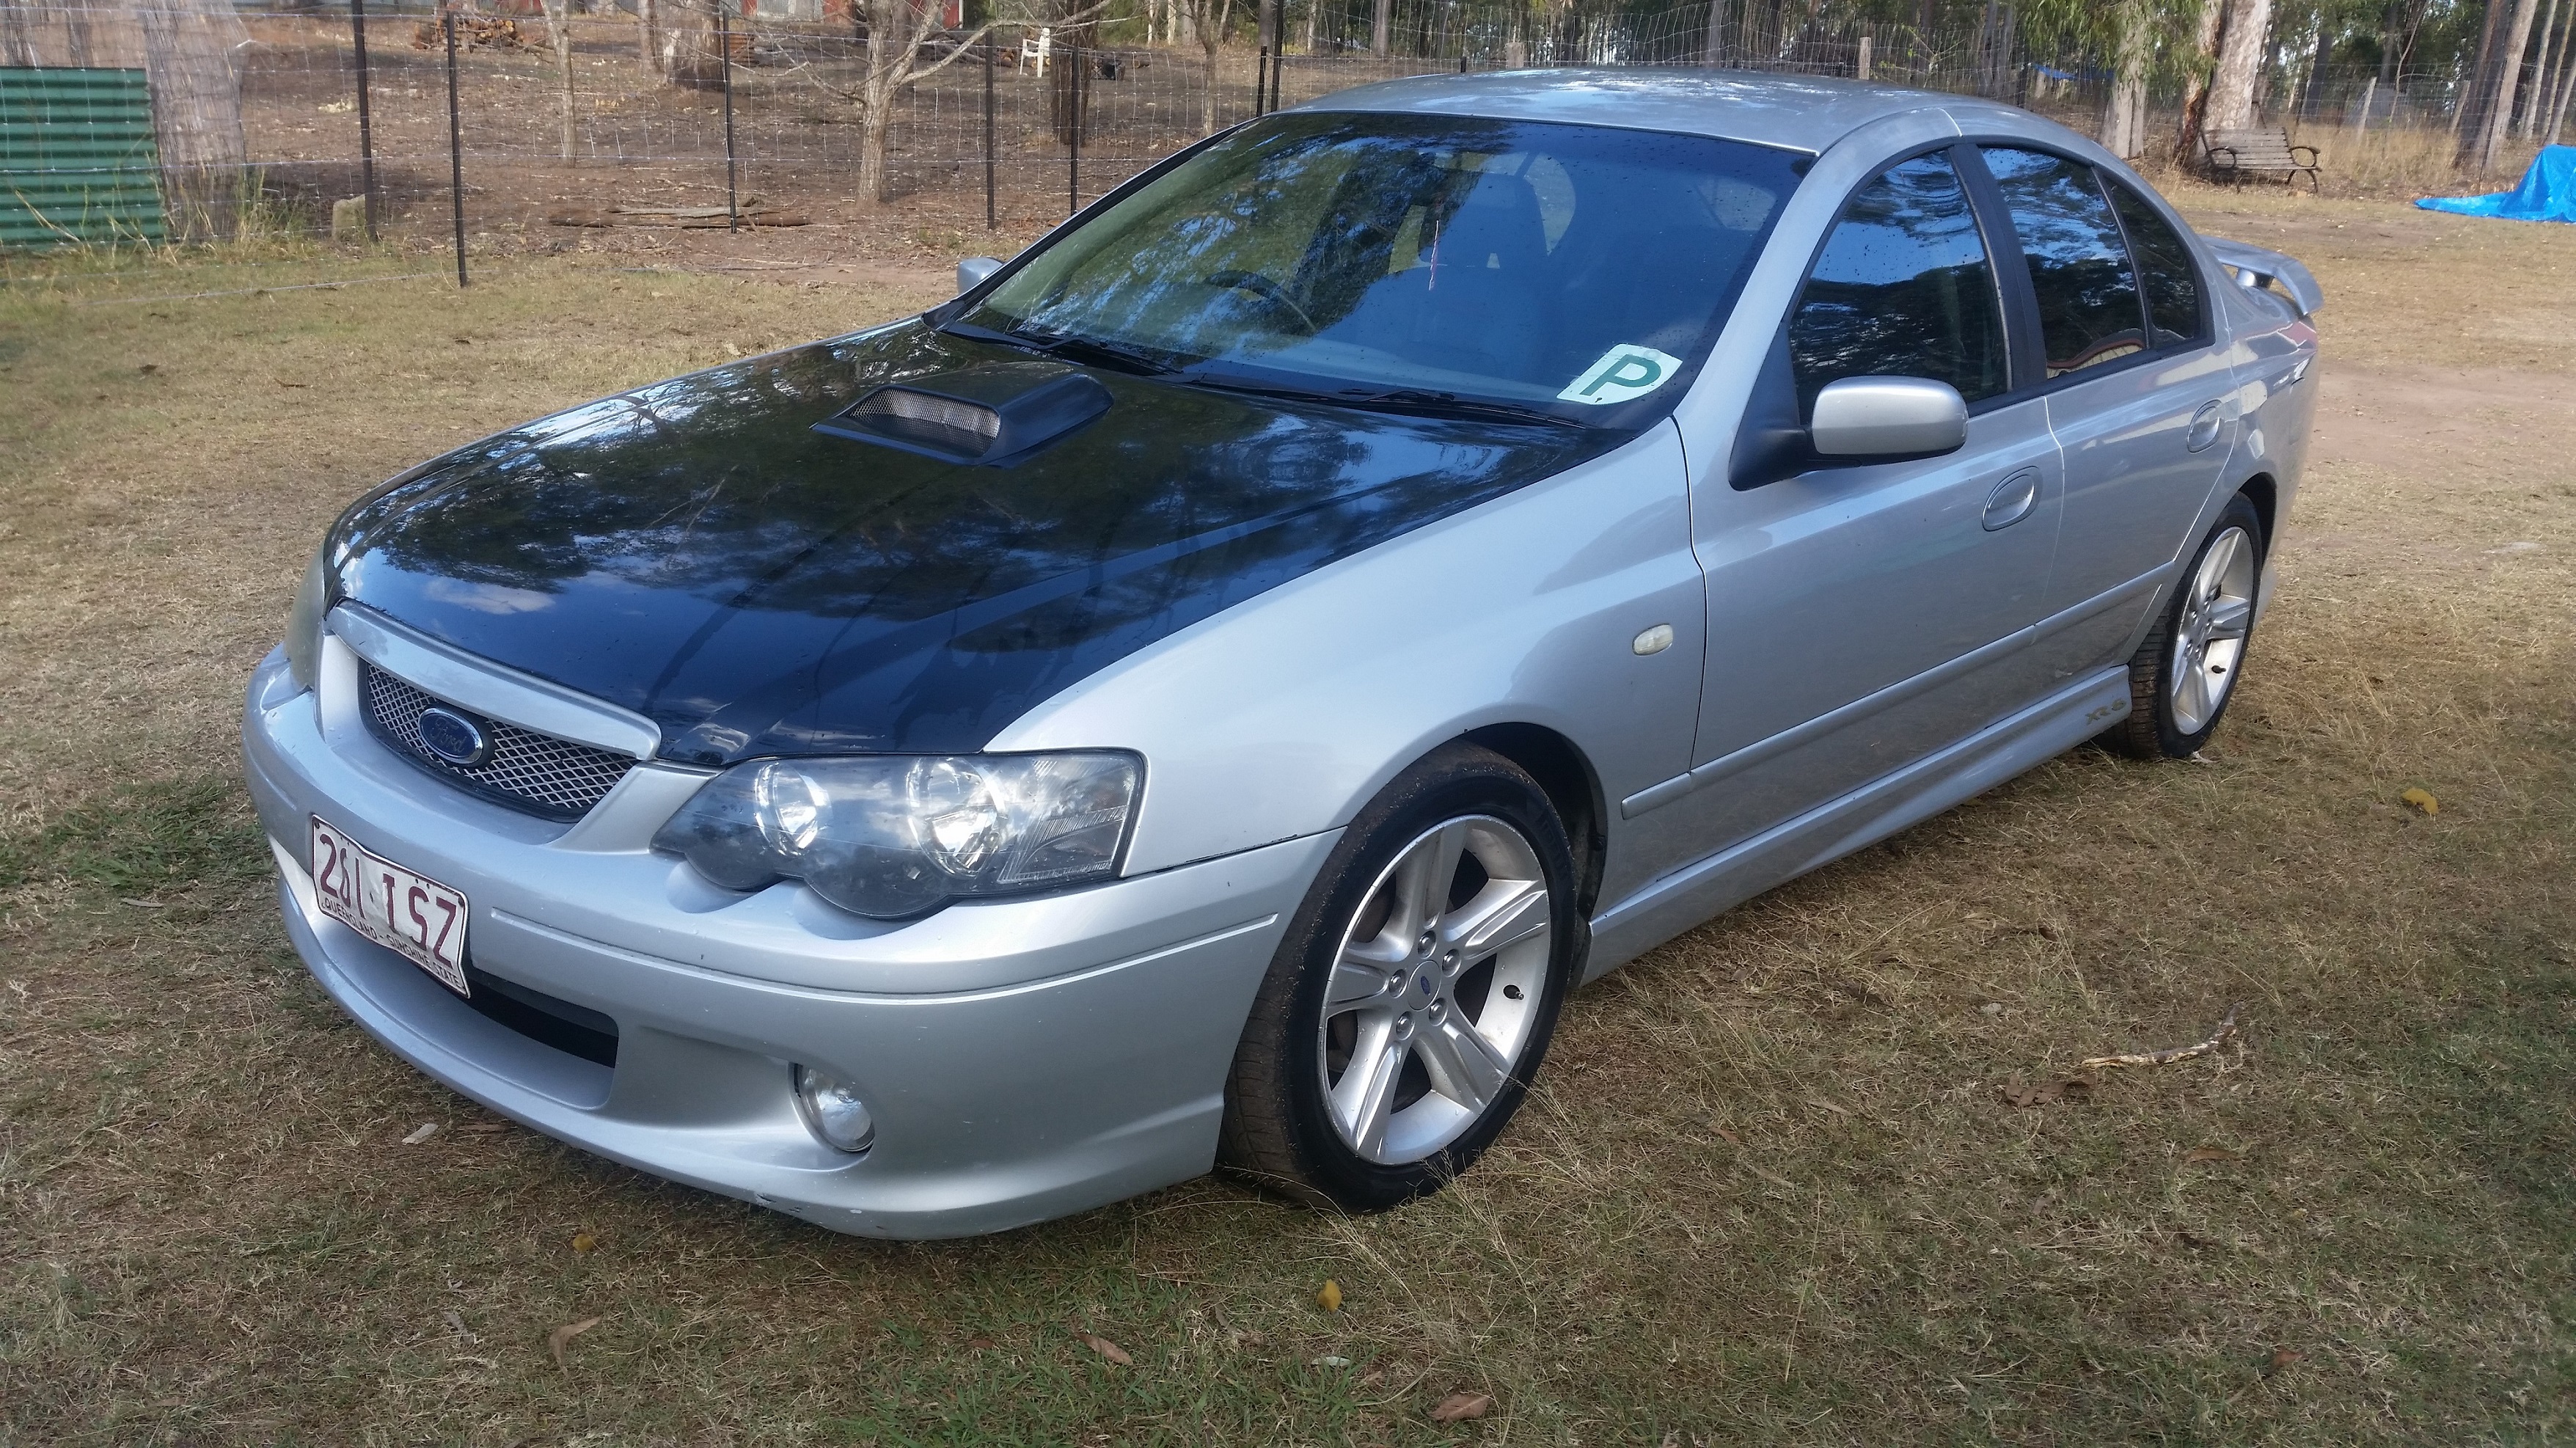 Ford falcon xr6 ba mkii review #7